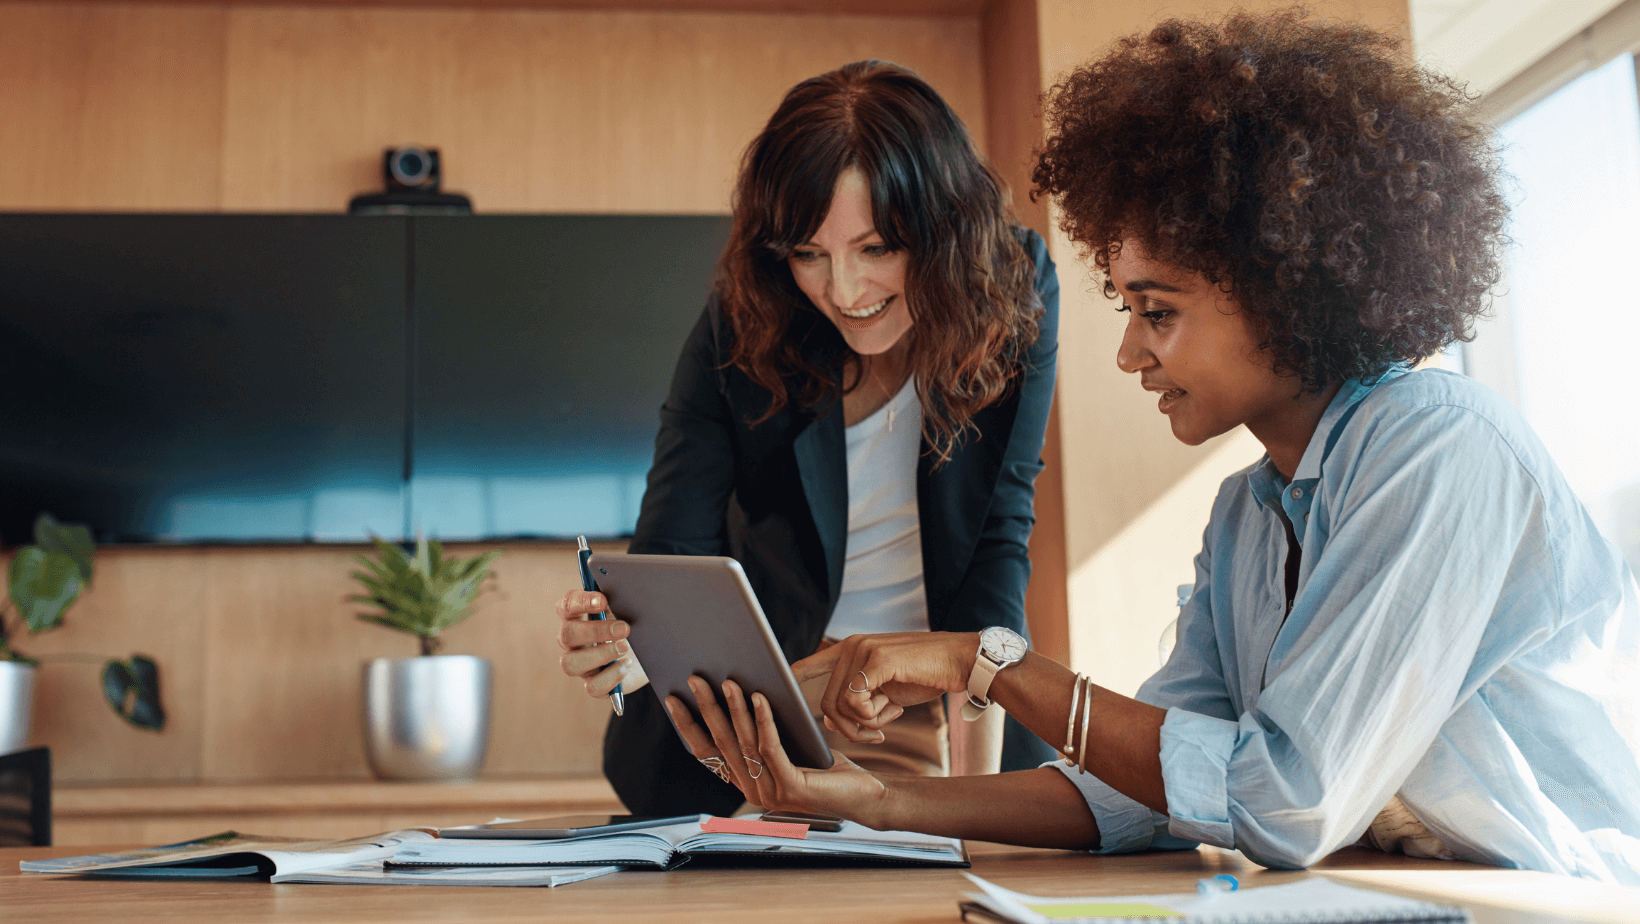 Two women viewing hr tech tools on ipad